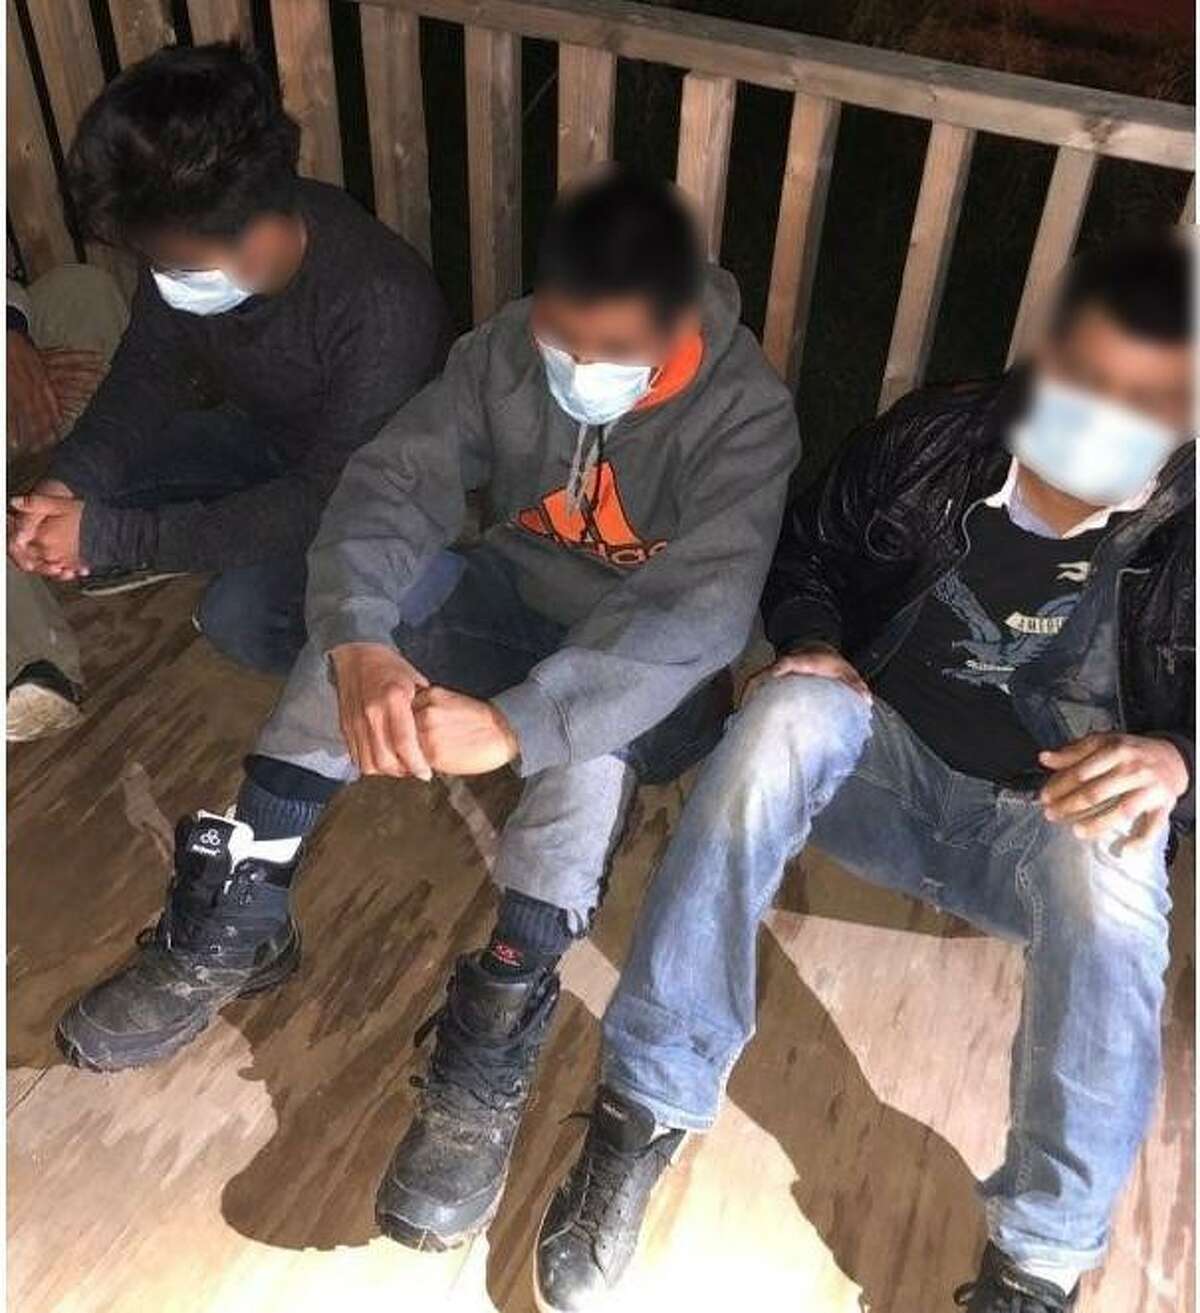 U.S. Border Patrol agents said this group of people were found inside a stash house in Zapata County. All were determined to be immigrants who were illegally present in the country.